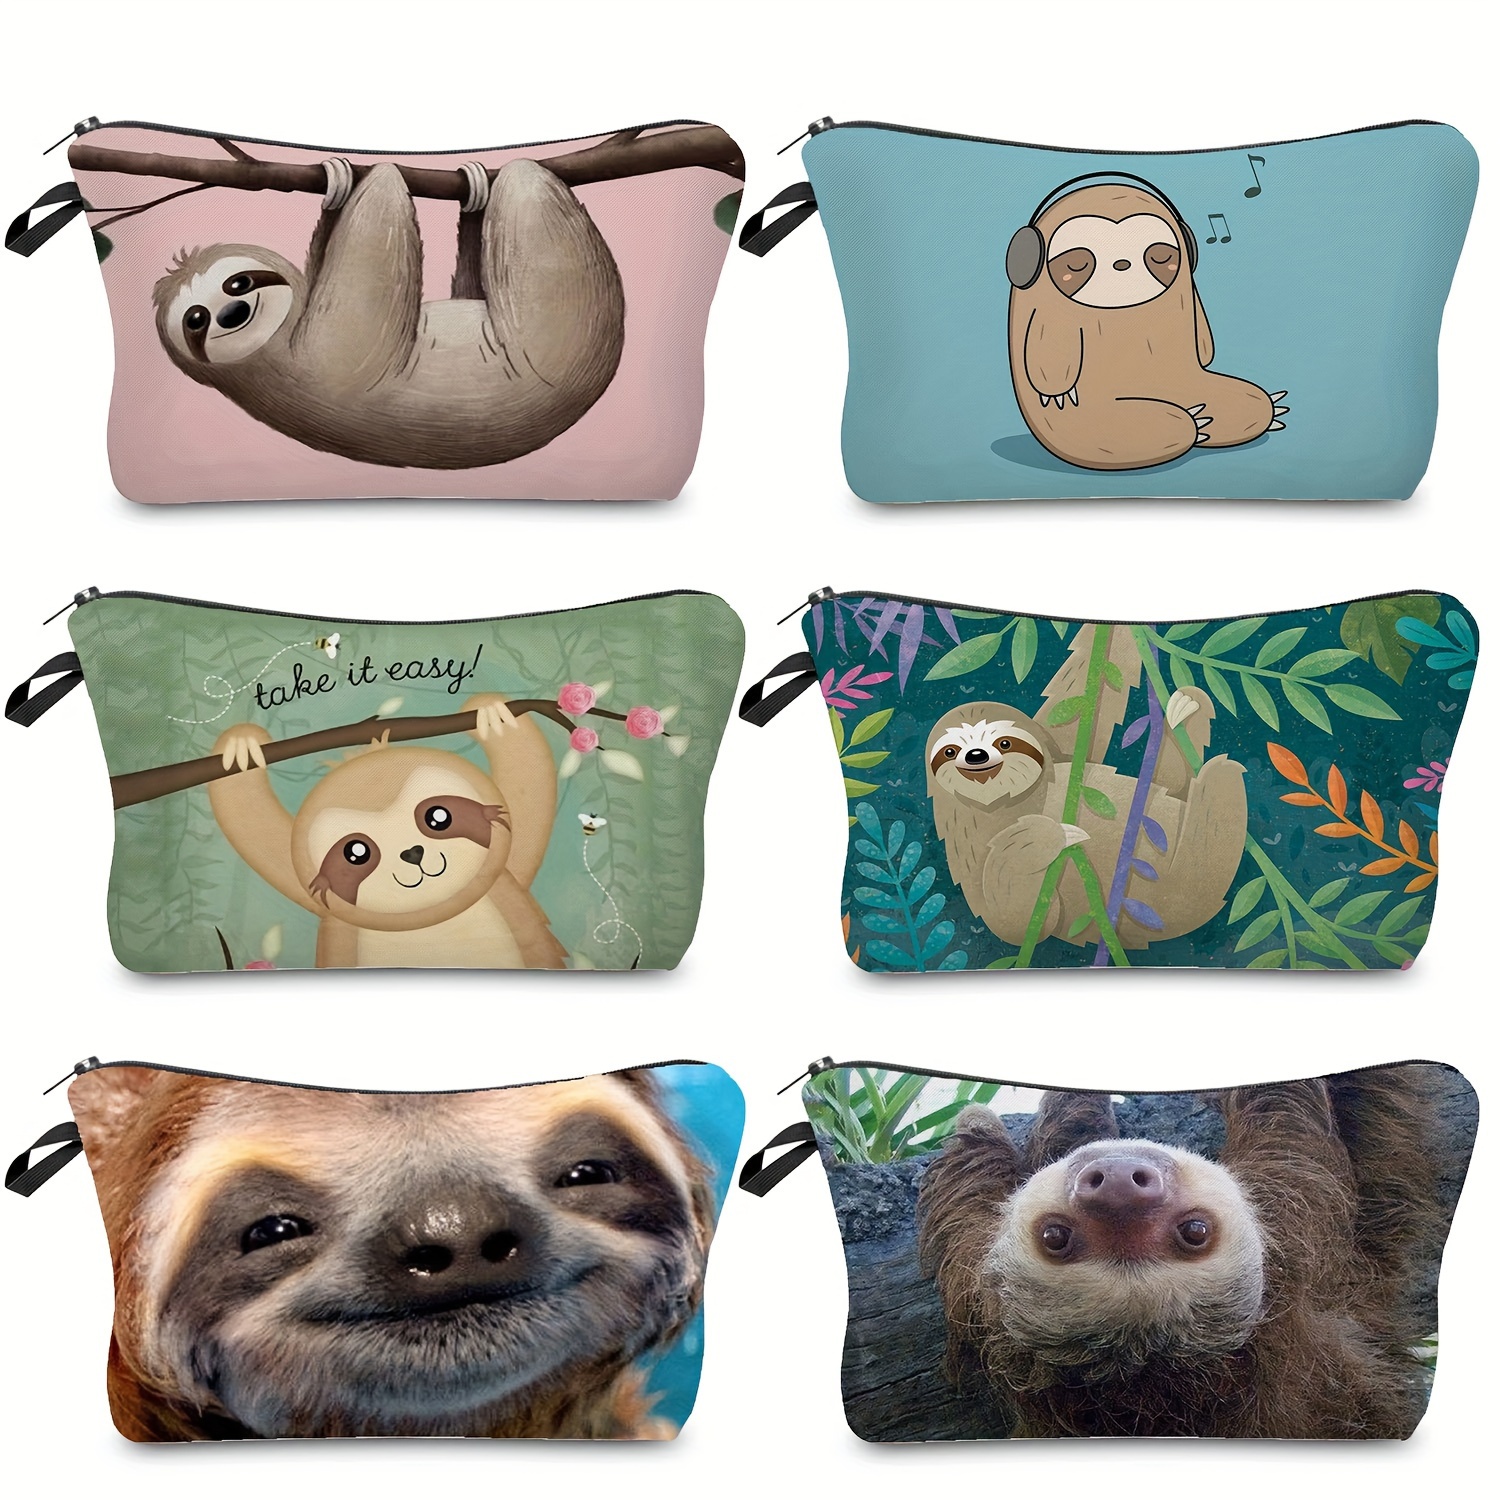 

Cute Cartoon Sloth Print Makeup Bag, Travel Portable Toiletry Bag Cosmetic Storage Bag, Animal Pattern Compact Clutch Bag Mobile Phone Bag, Student Pencil Case Party Gift